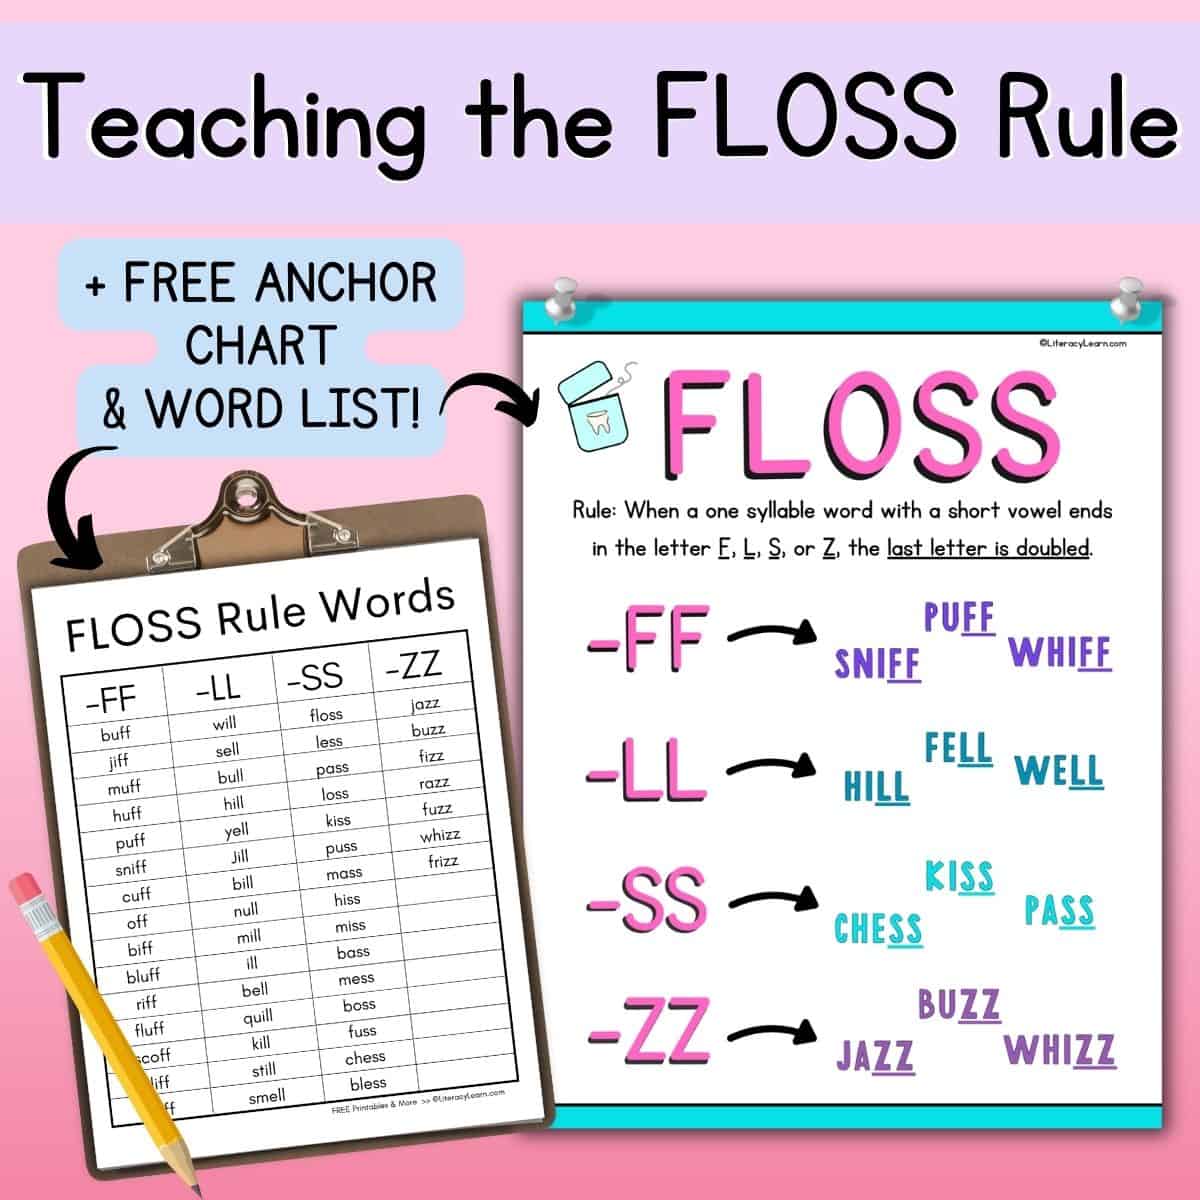 Colorful graphic with a FLOSS rule poster and word list. 